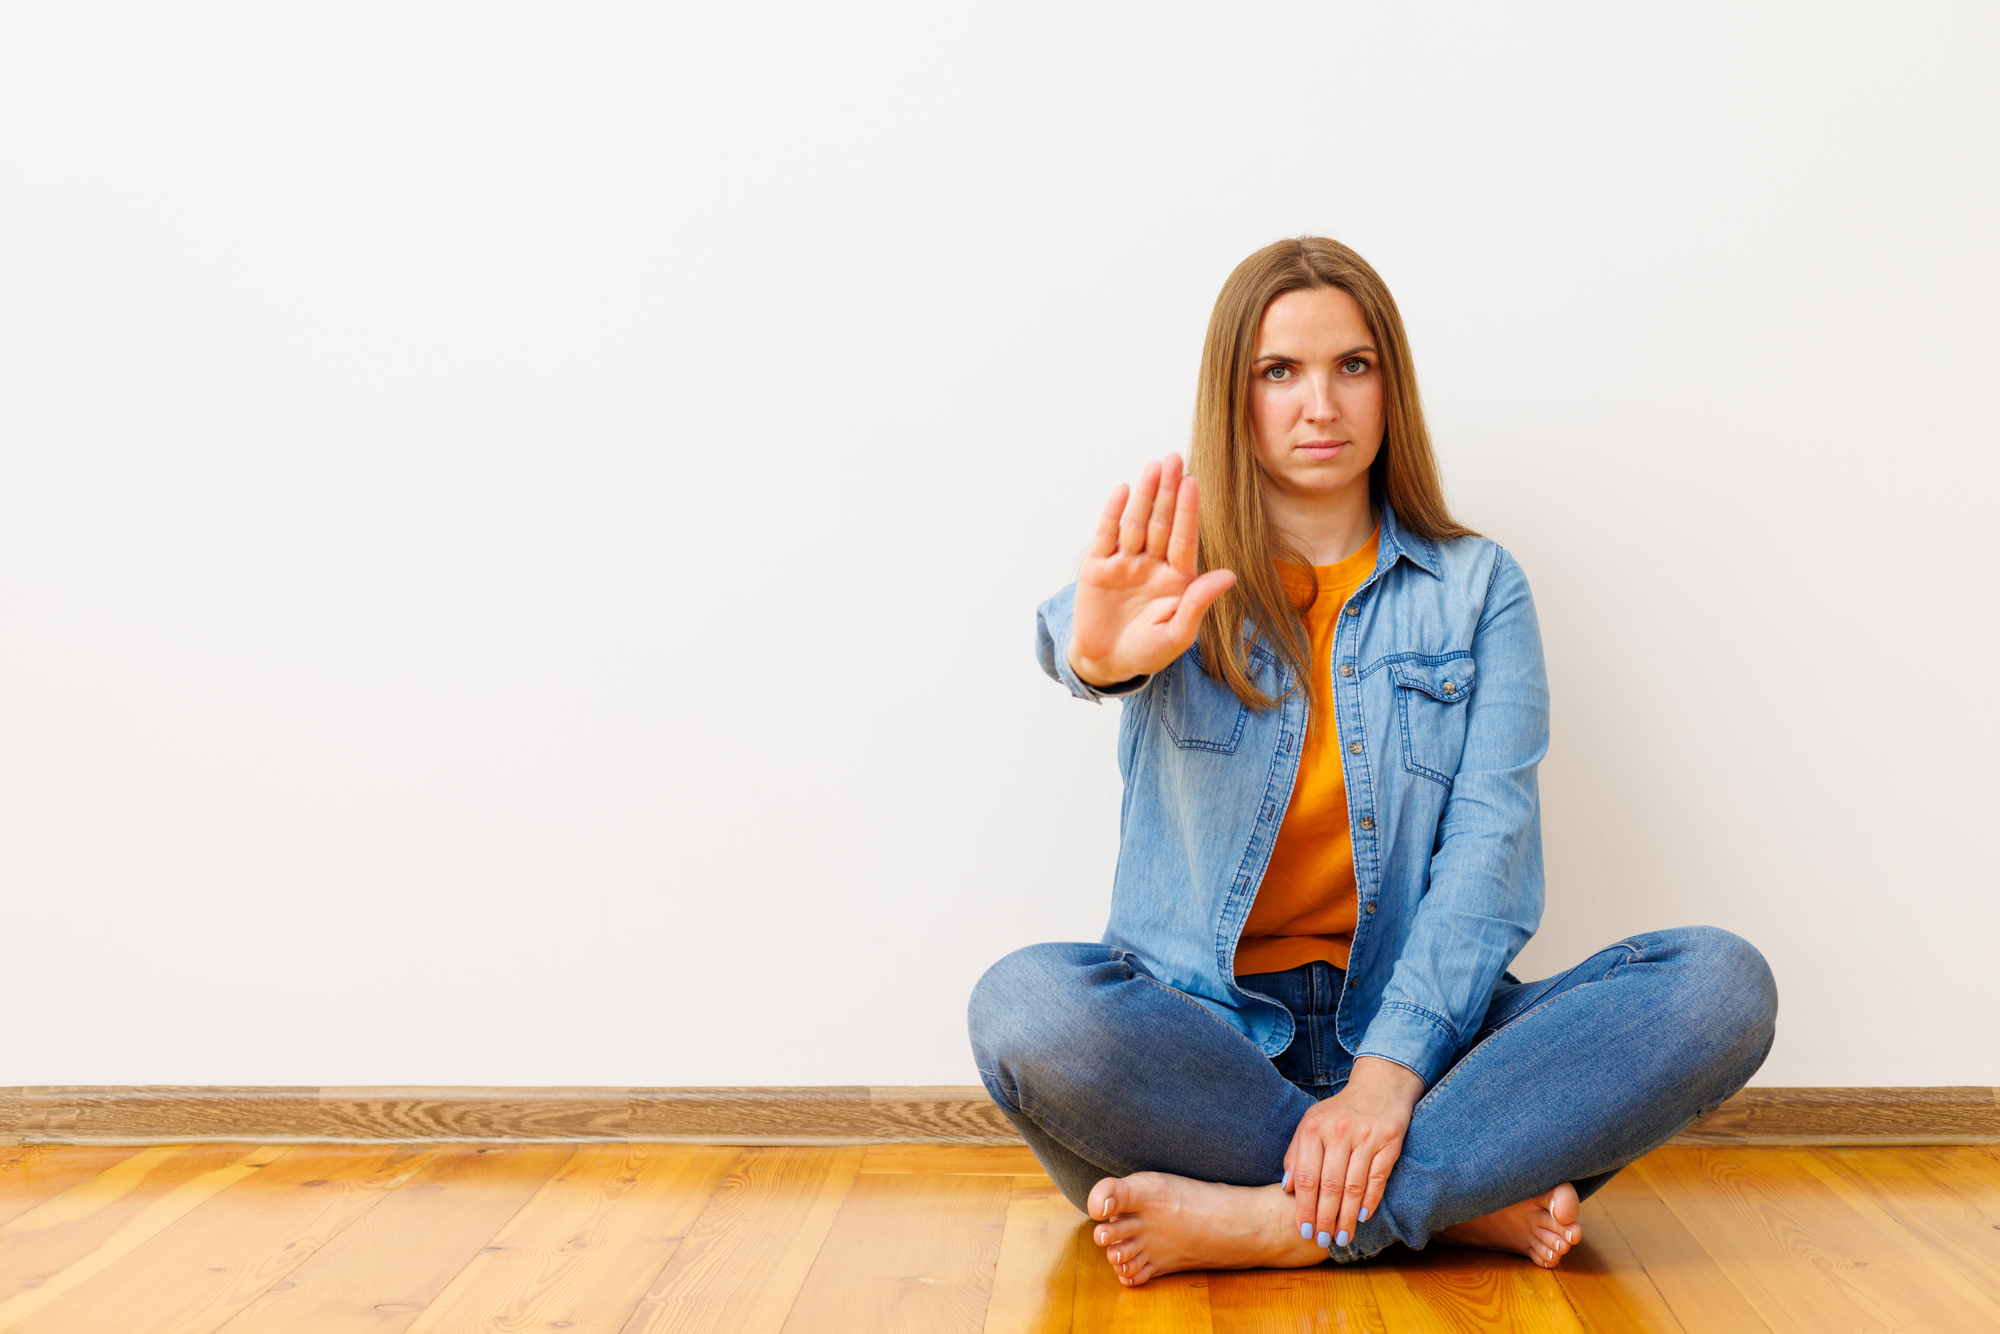 A woman with long hair sits cross-legged on a wooden floor against a plain white wall. She is wearing a denim jacket, jeans, and an orange top, with one hand raised in a stop gesture, her expression serious, conveying a clear message to halt or stop.